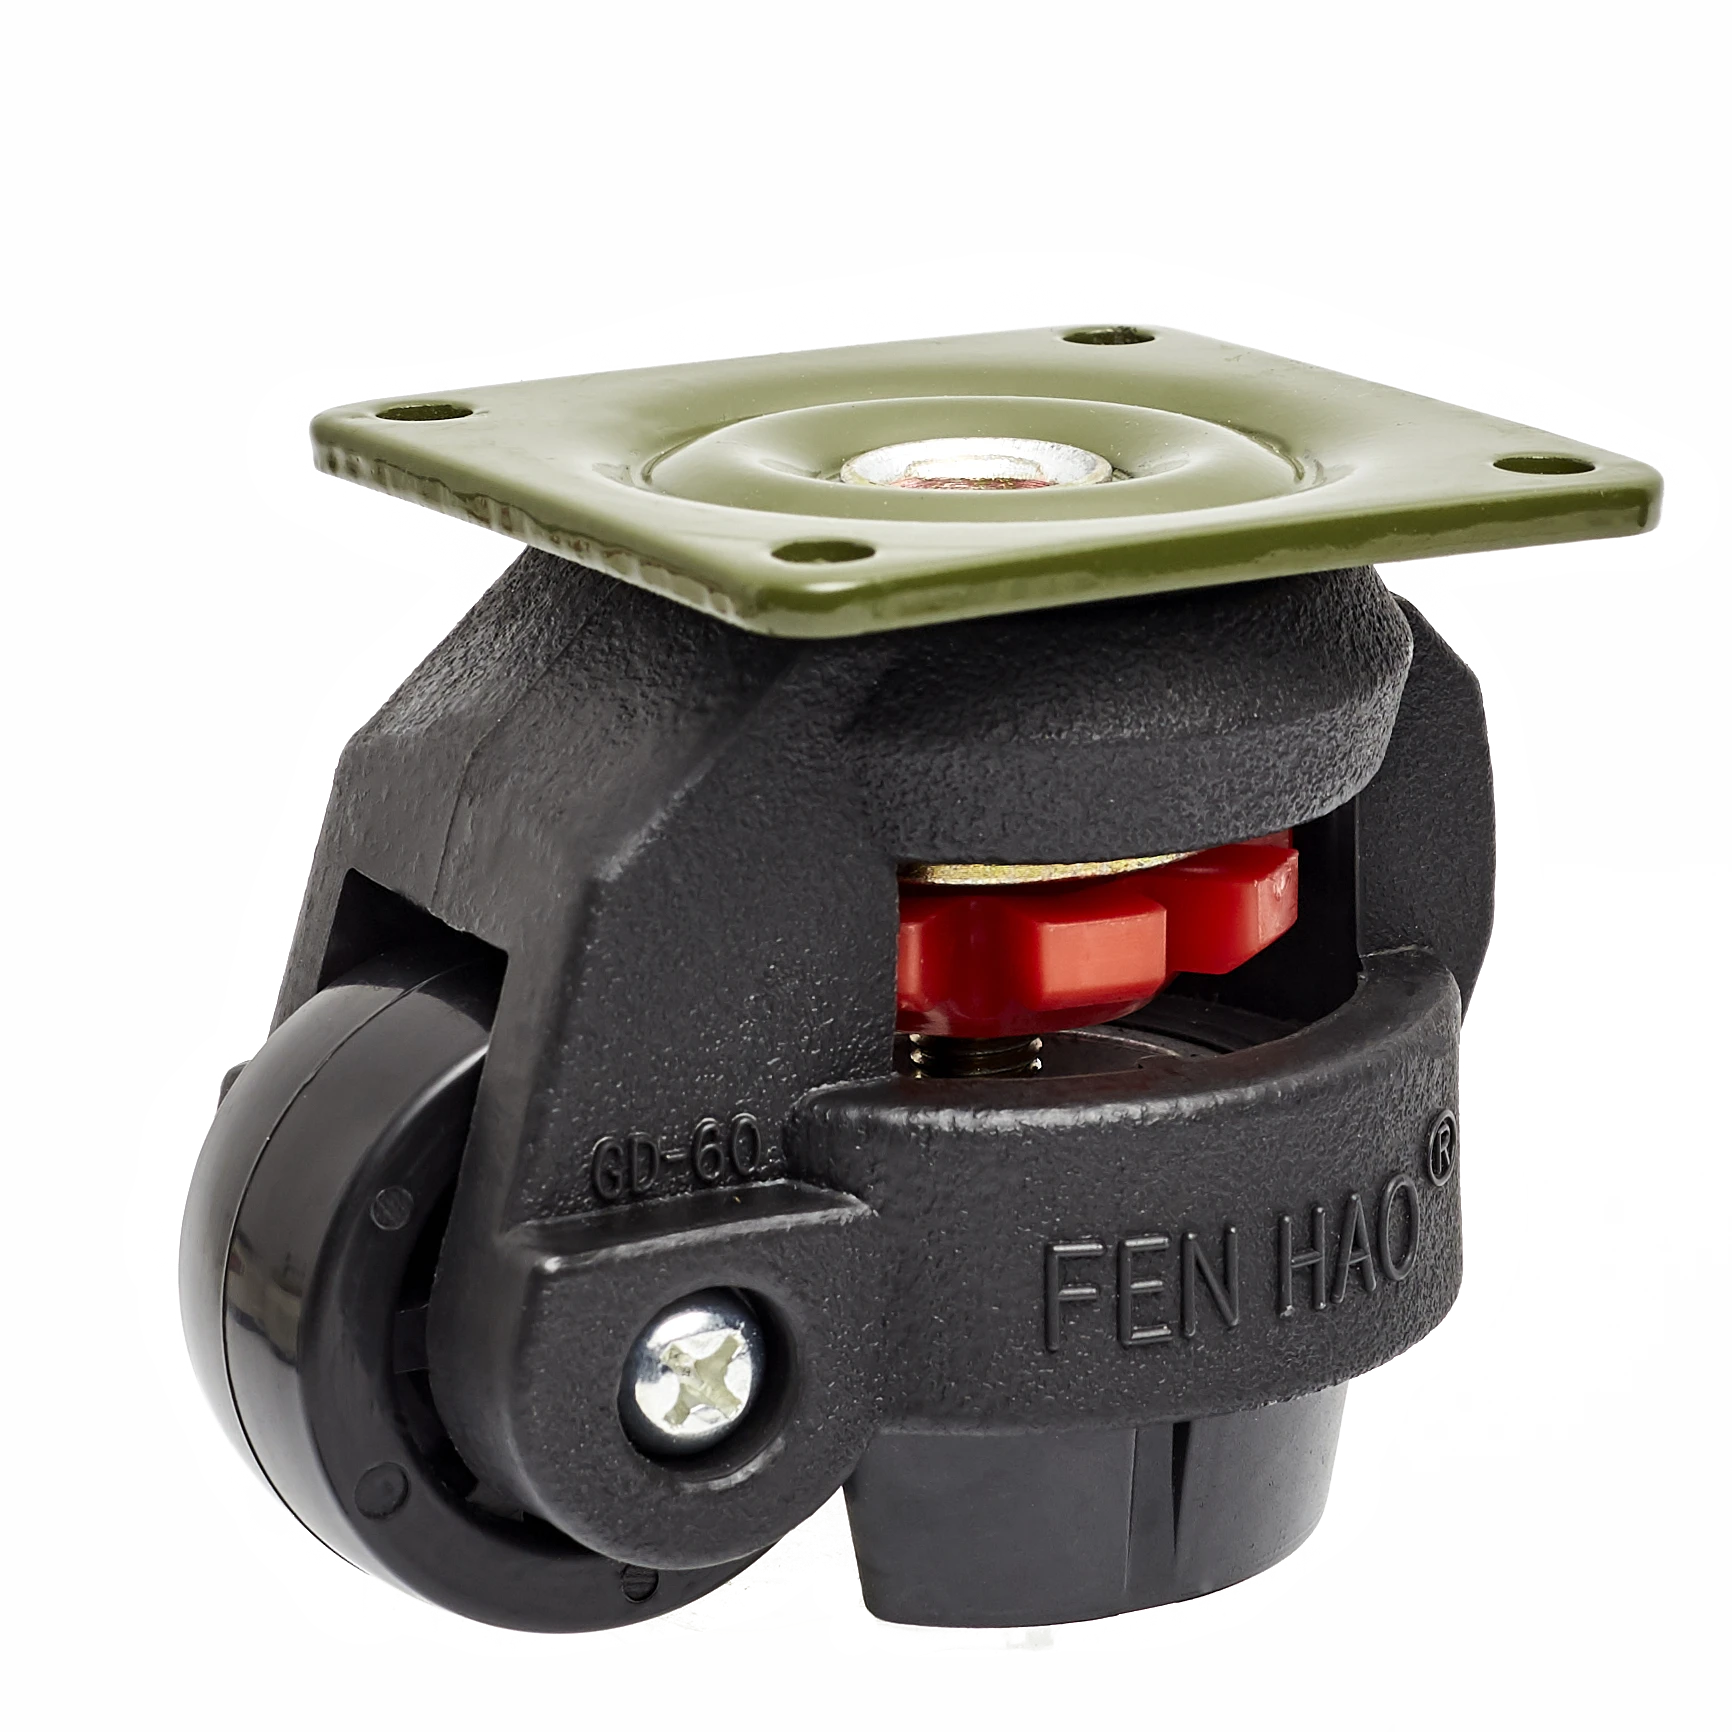 retractable machine equipment moving leveling casters threaded stem mounted with nylon caster wheel